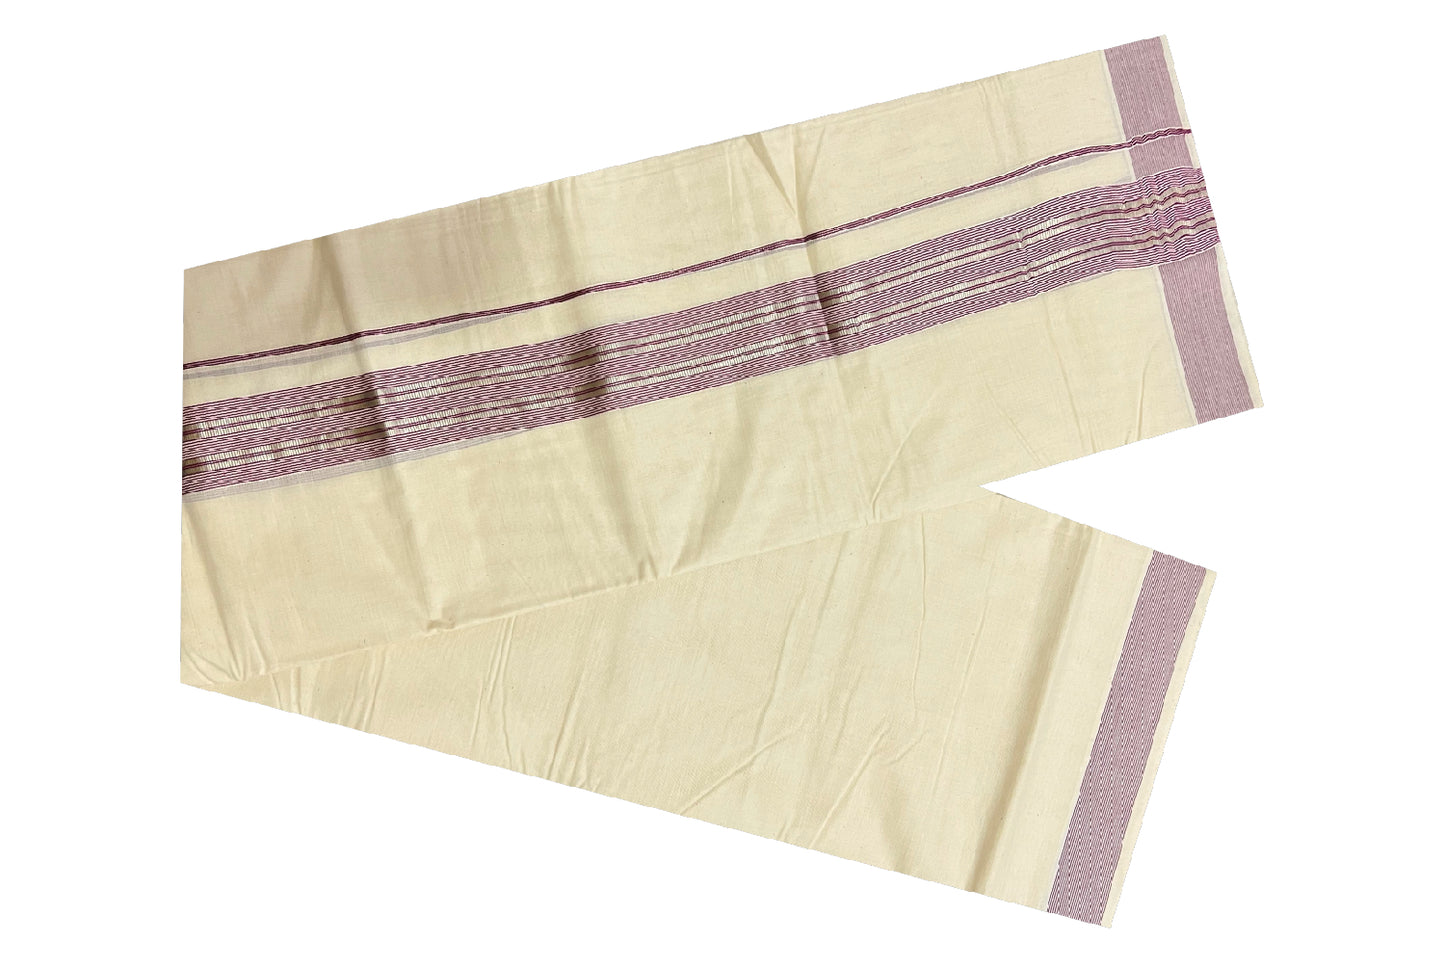 Off White Kerala Double Mundu with Silver Kasavu and Maroon Line Border (South Indian Dhoti)